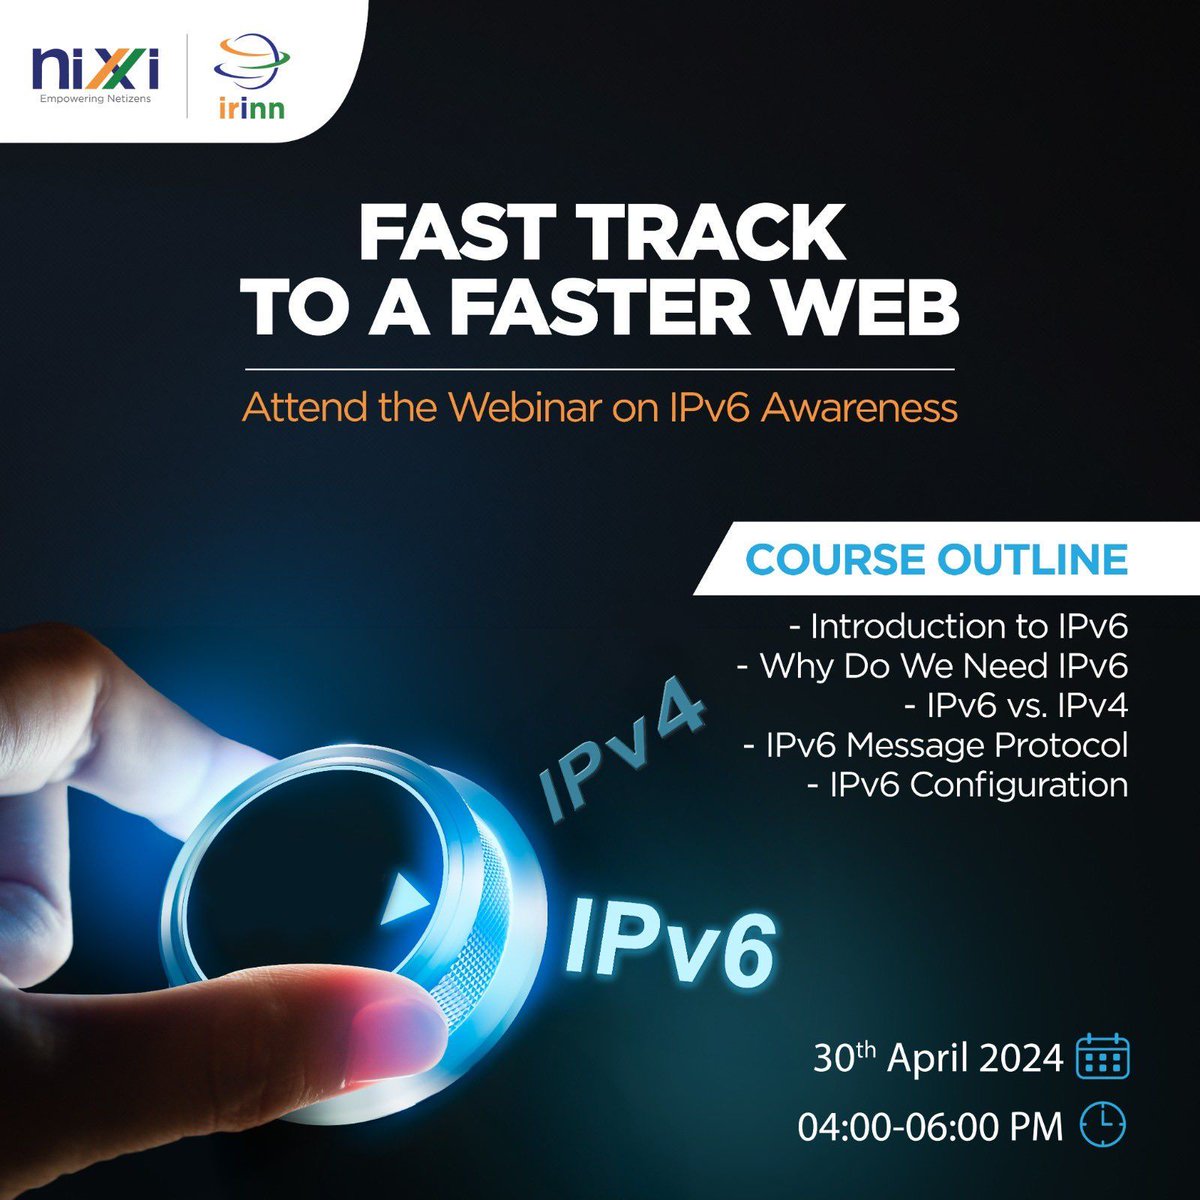 Future-proof your Internet Connection and navigate the web with ease!

Register for the #IPv6 Awareness Webinar on April 30 and join IRINN on this exciting journey towards a more robust and secure online experience!

#DigitalIndia @inregistry